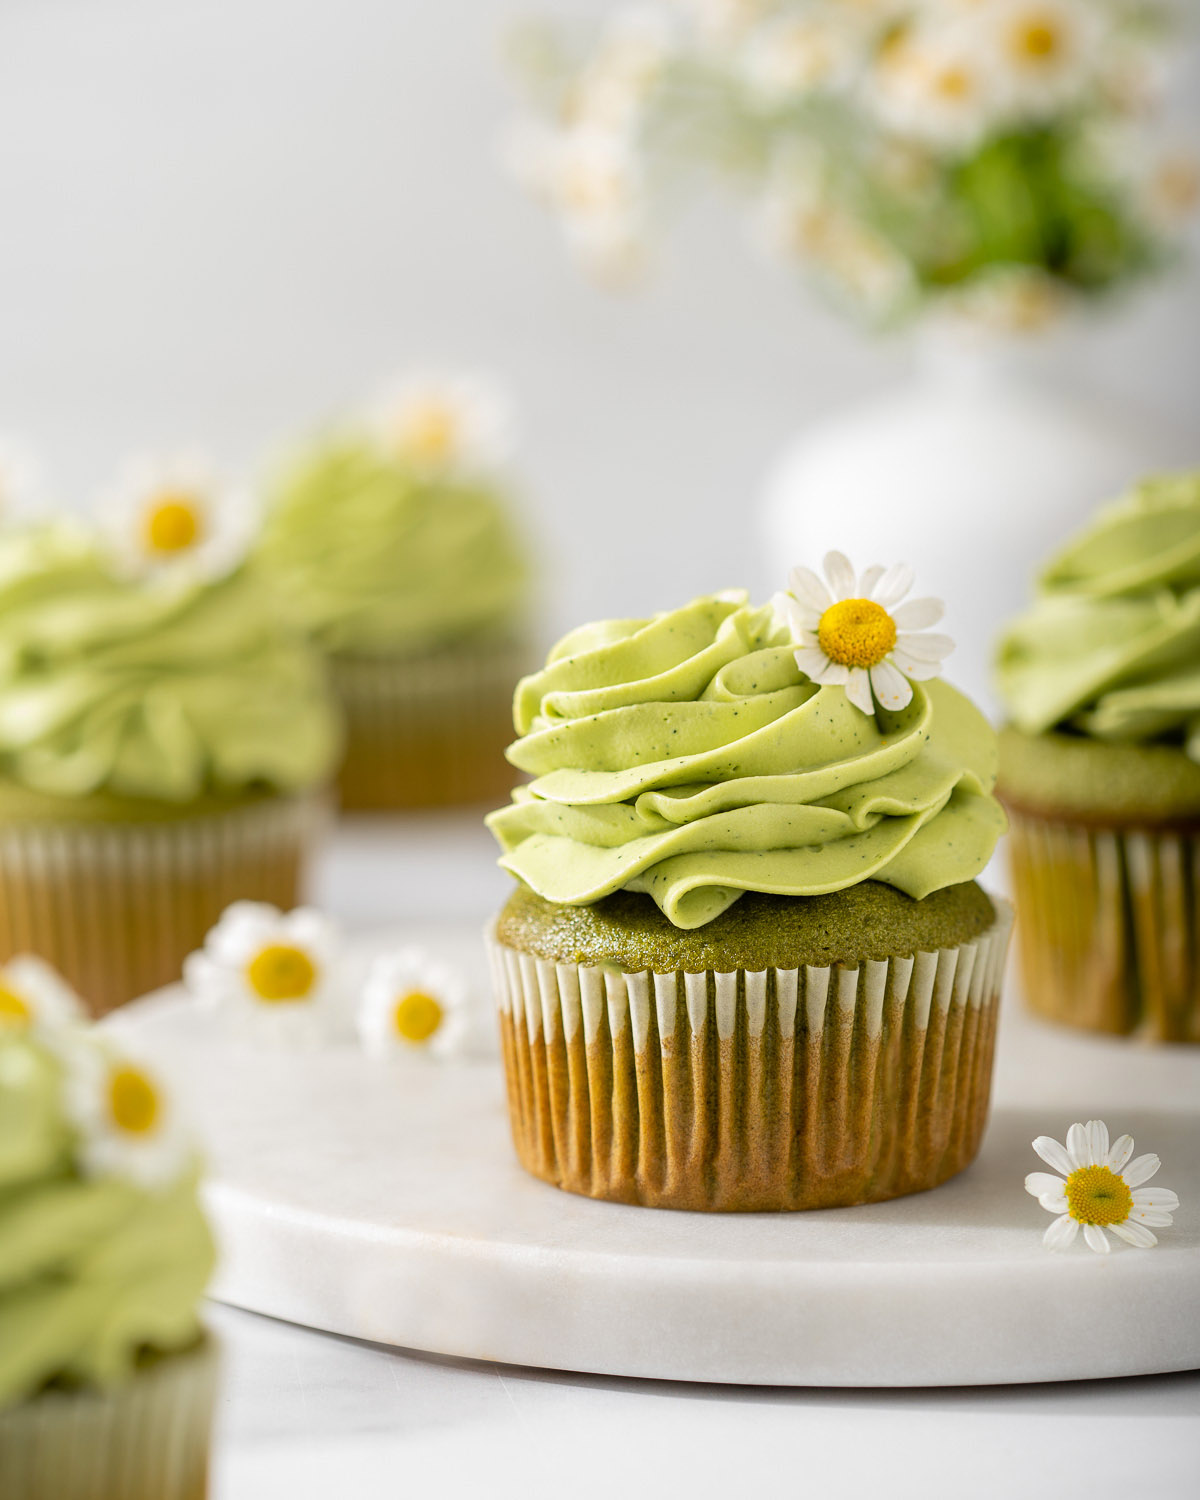 A matcha cupcake on a marble tray surrounded by more matcha cupcakes.